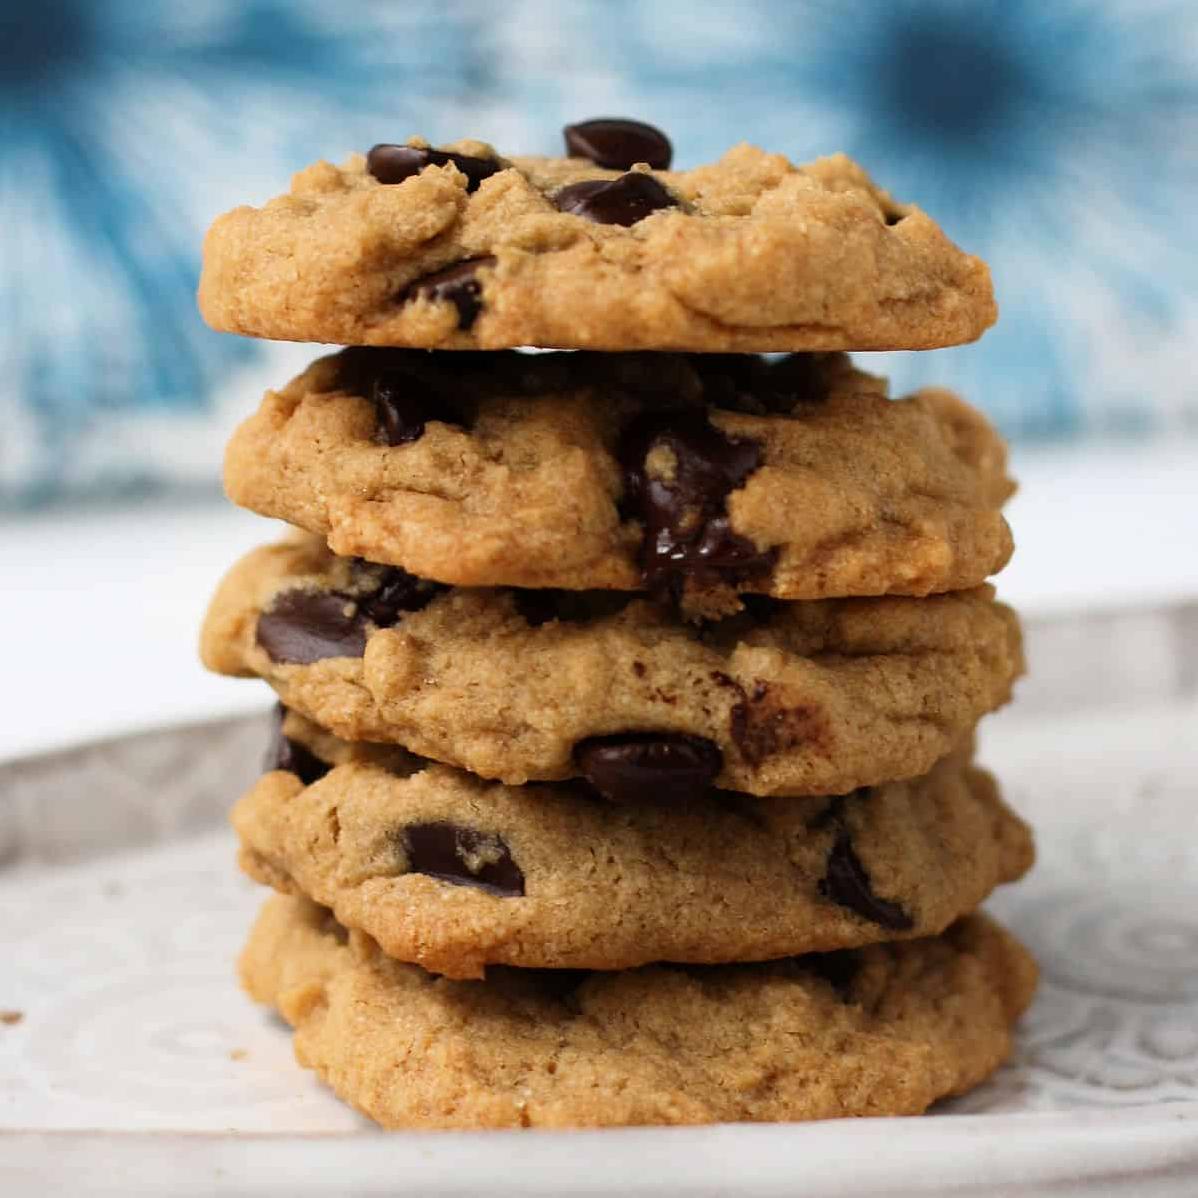  You won't even notice these cookies are gluten-free, egg-free and dairy-free - they're that yummy!